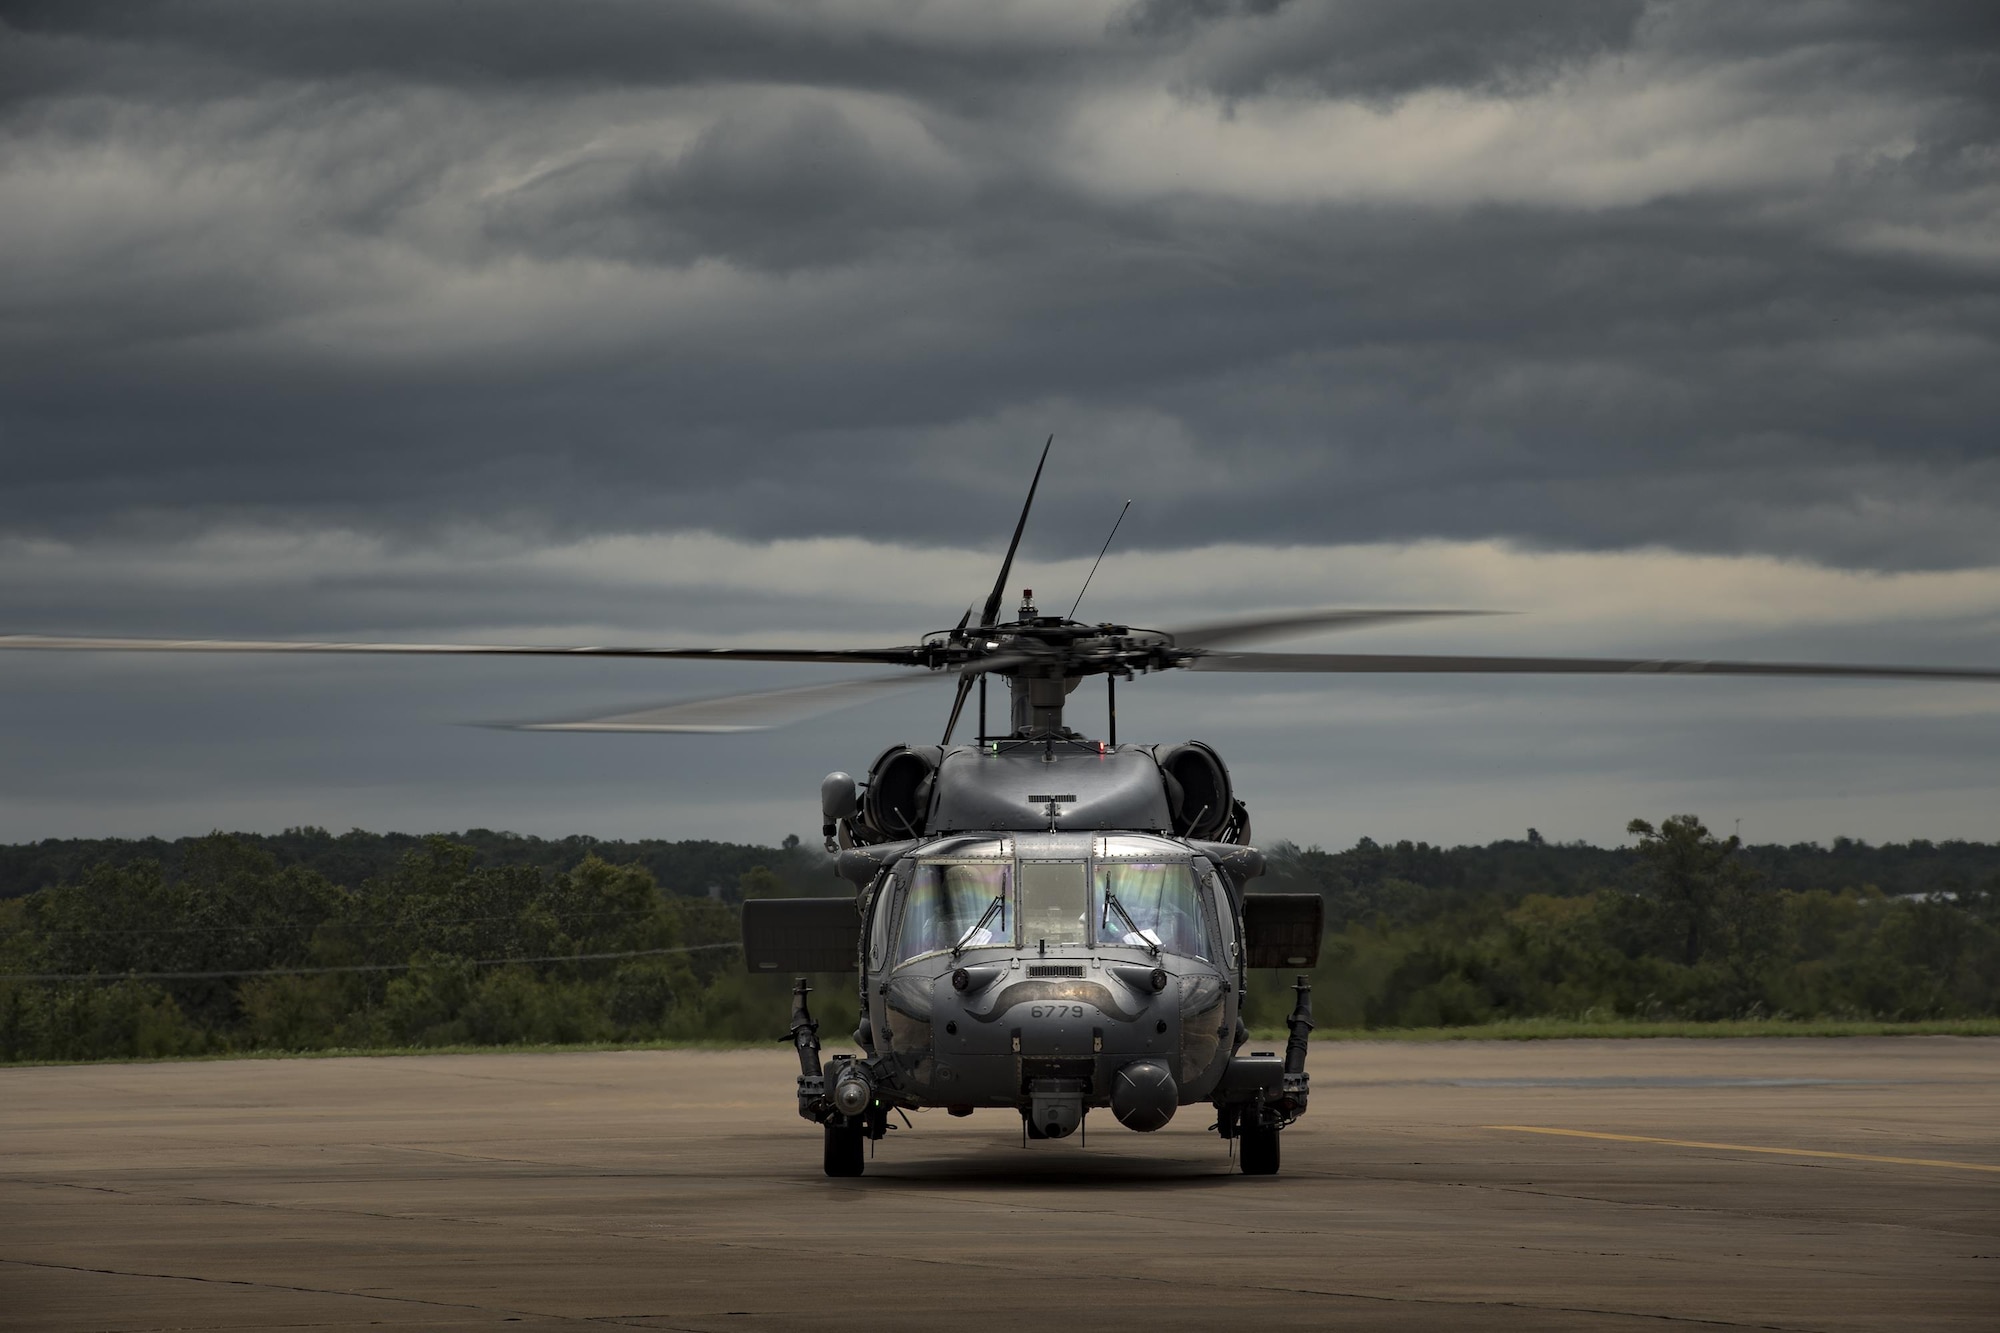 An HH-60G Pave Hawk from the 41st Rescue Squadron returns from a sortie in support of Hurricane Harvey relief efforts, Aug. 29, 2017, at Easterwood Airport, College Station, Texas.